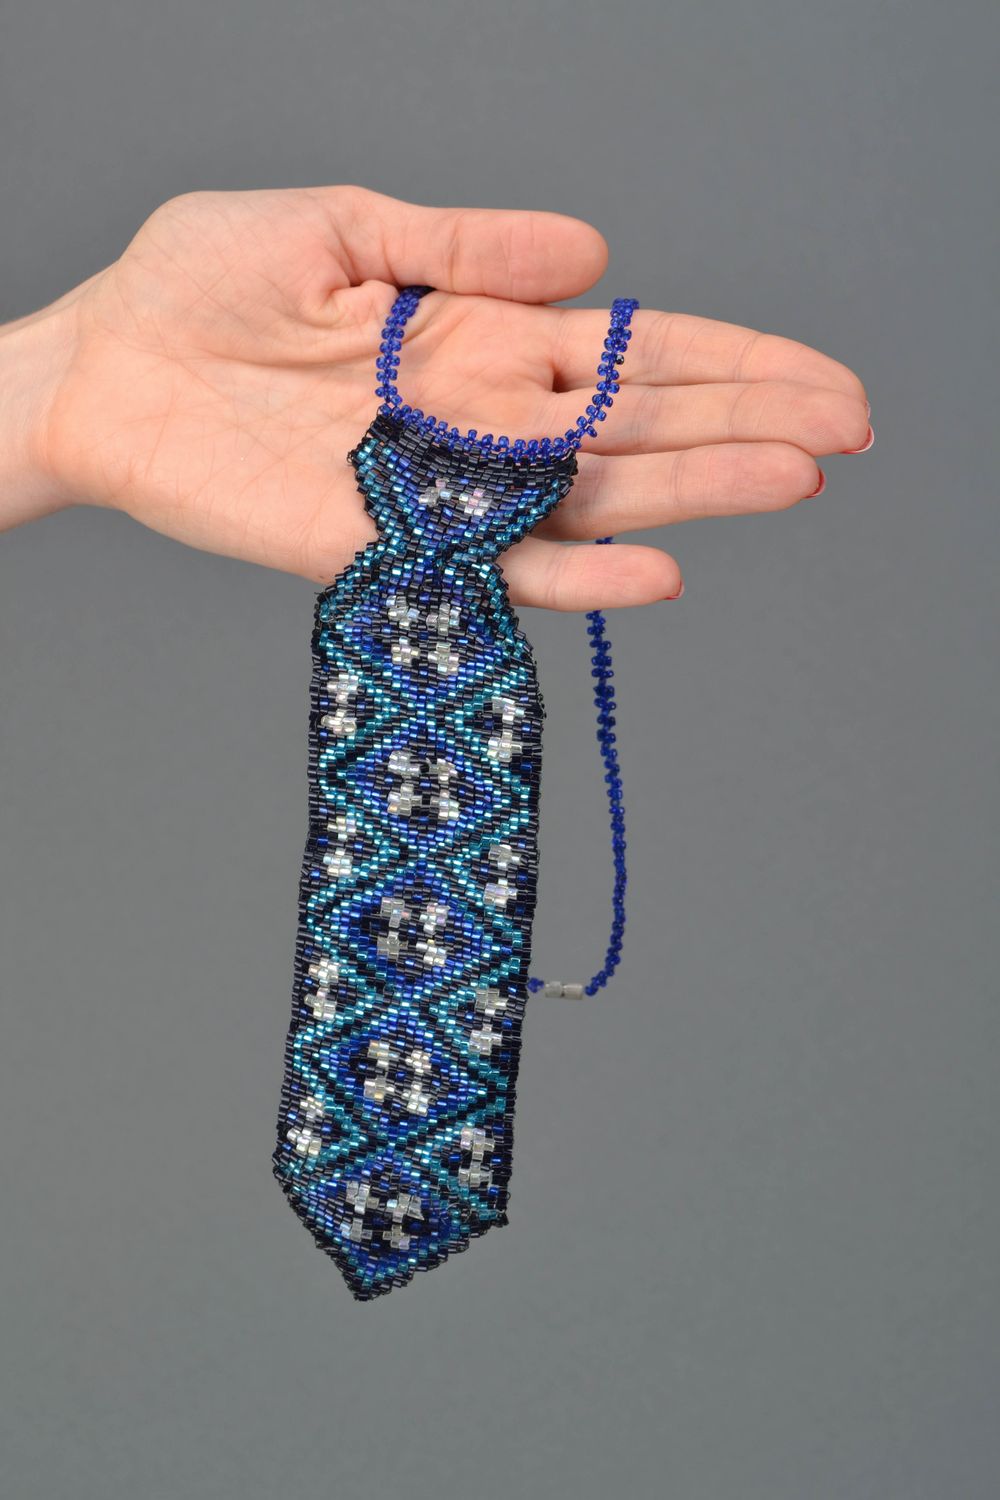 Beaded necklace in the shape of tie Ethnic photo 2